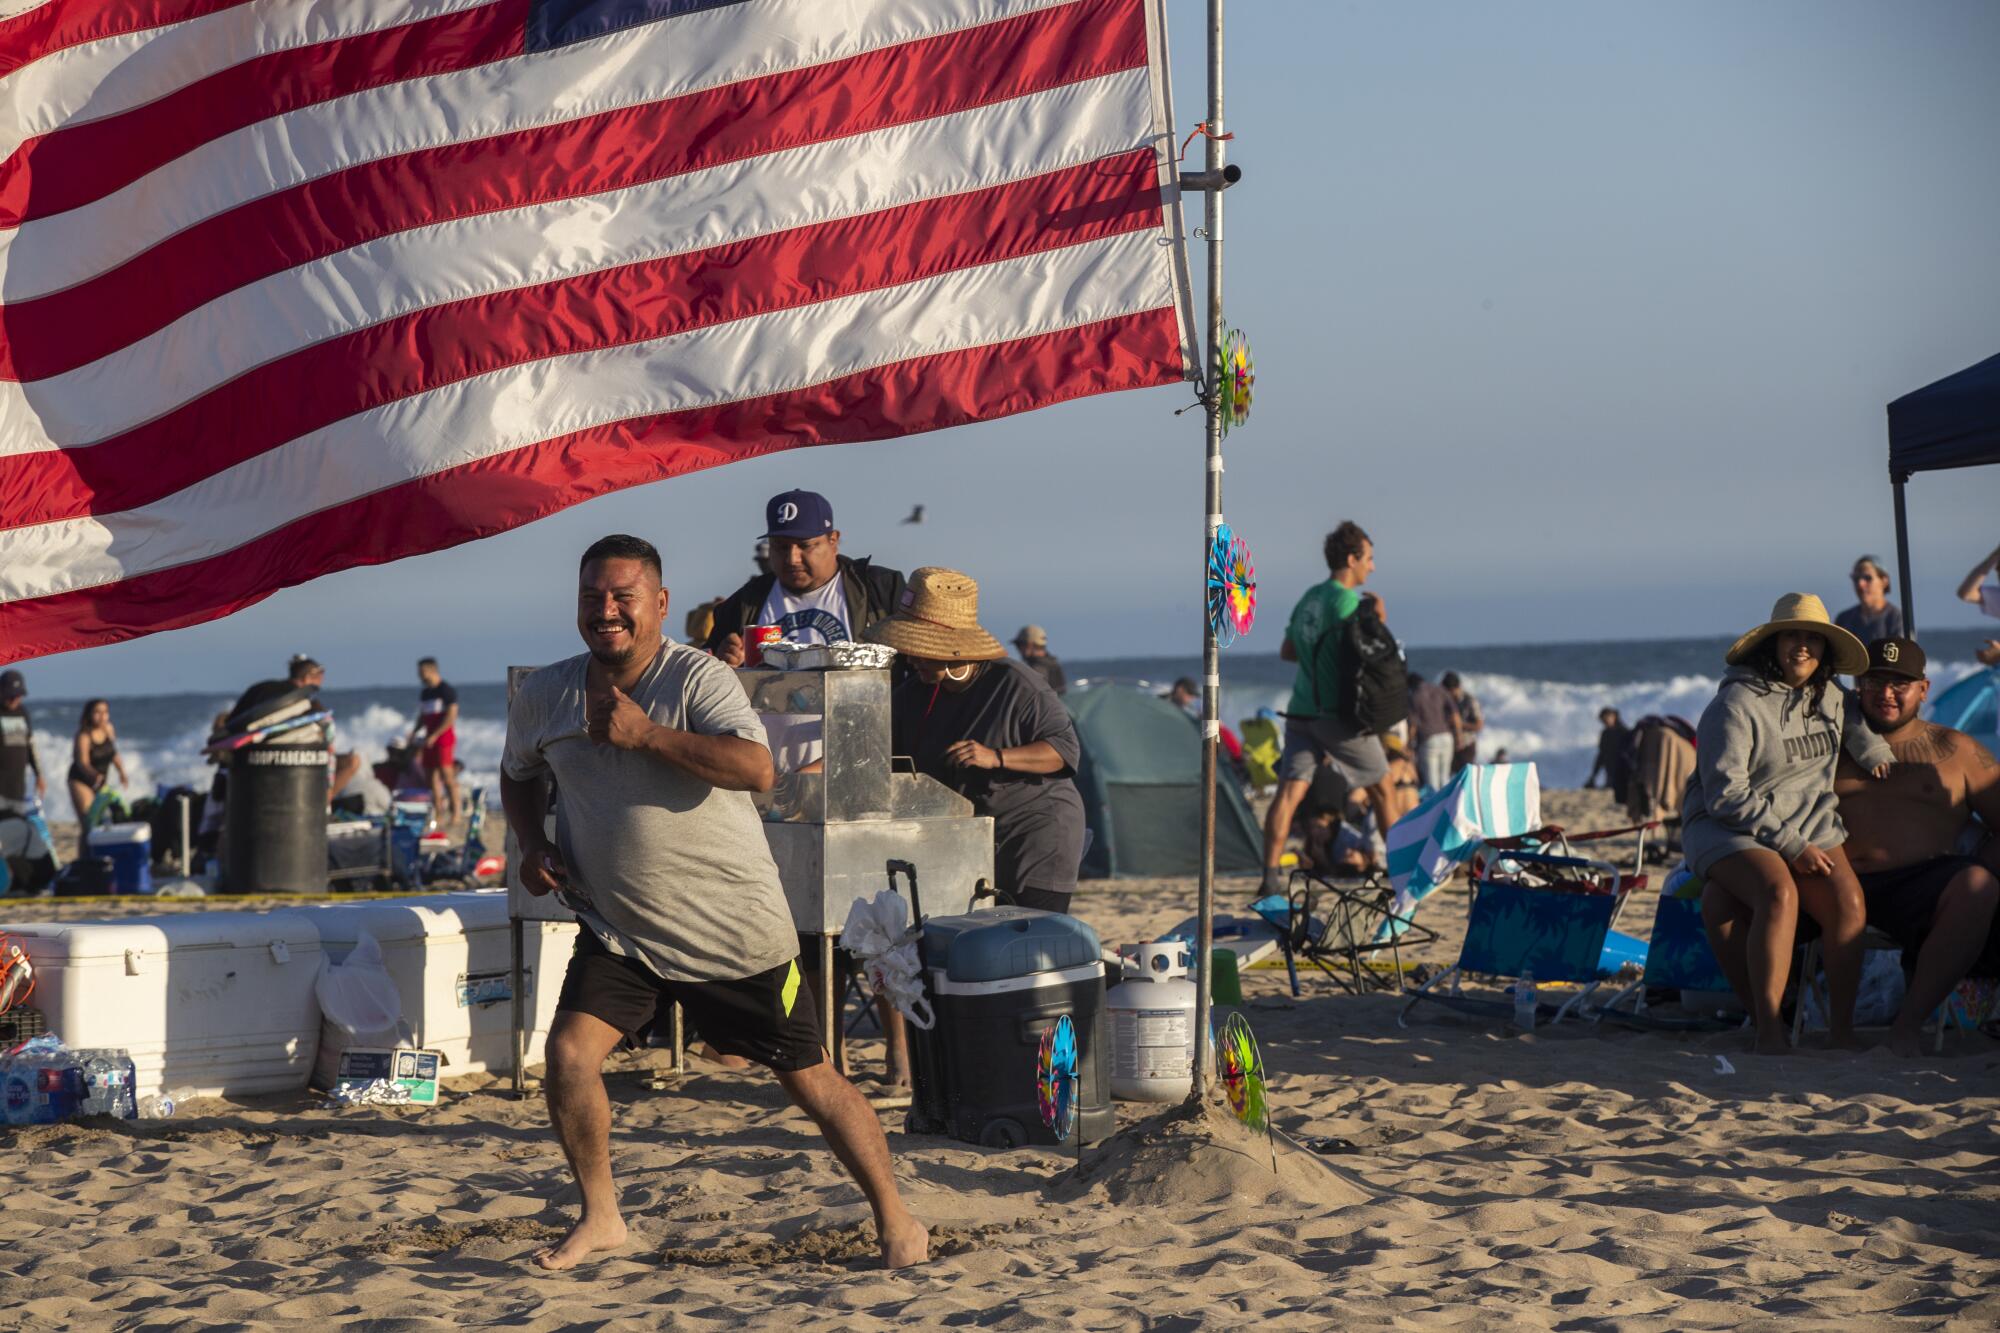 A smiling man stands on the sand with a U.S. flag and other people in the background 